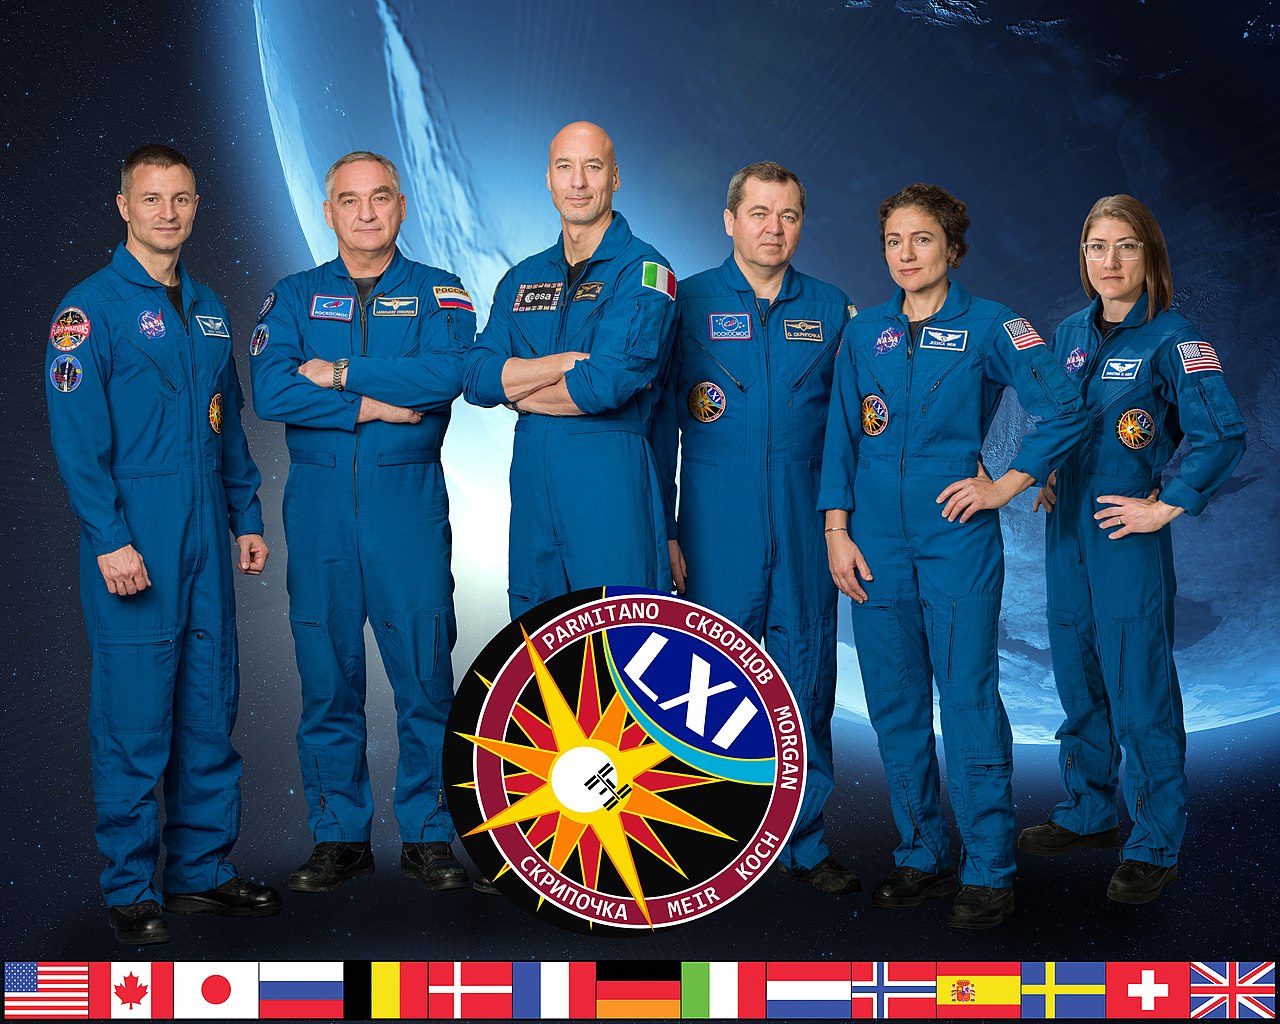 The official Expedition 61 crew portrait